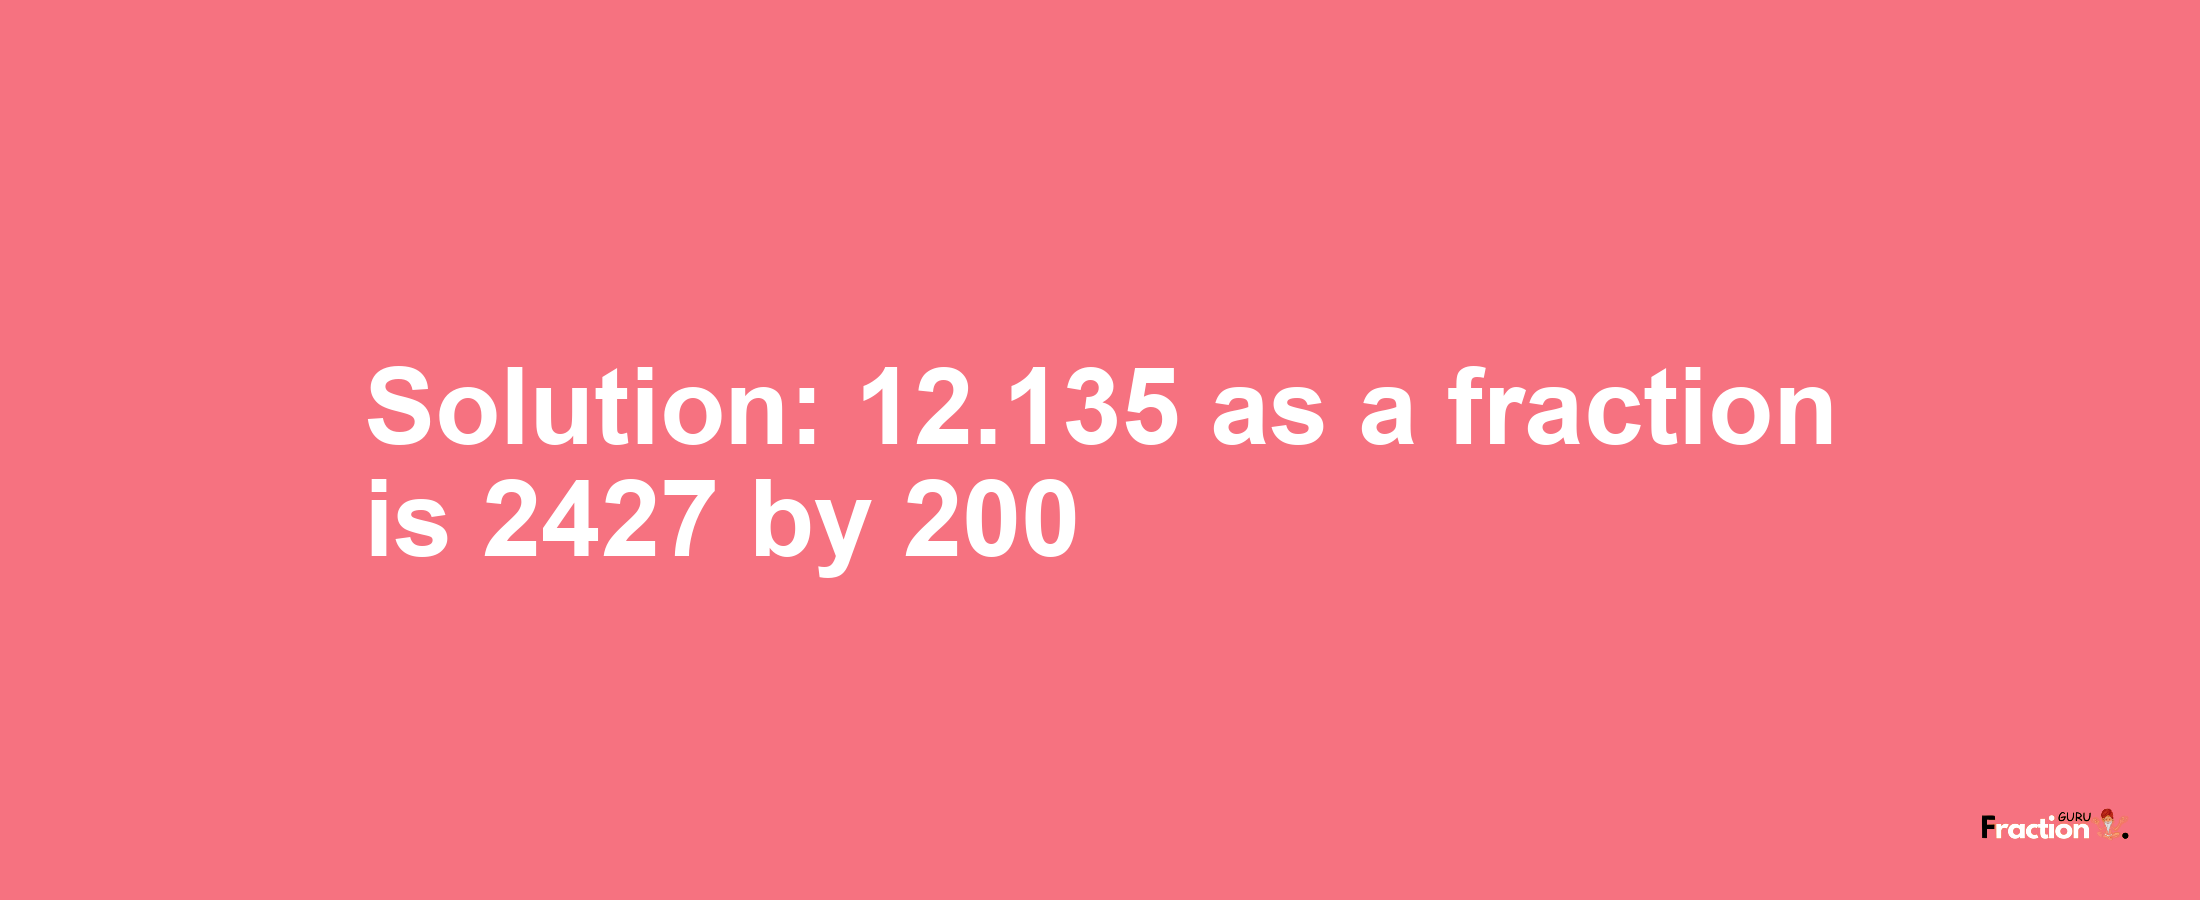 Solution:12.135 as a fraction is 2427/200